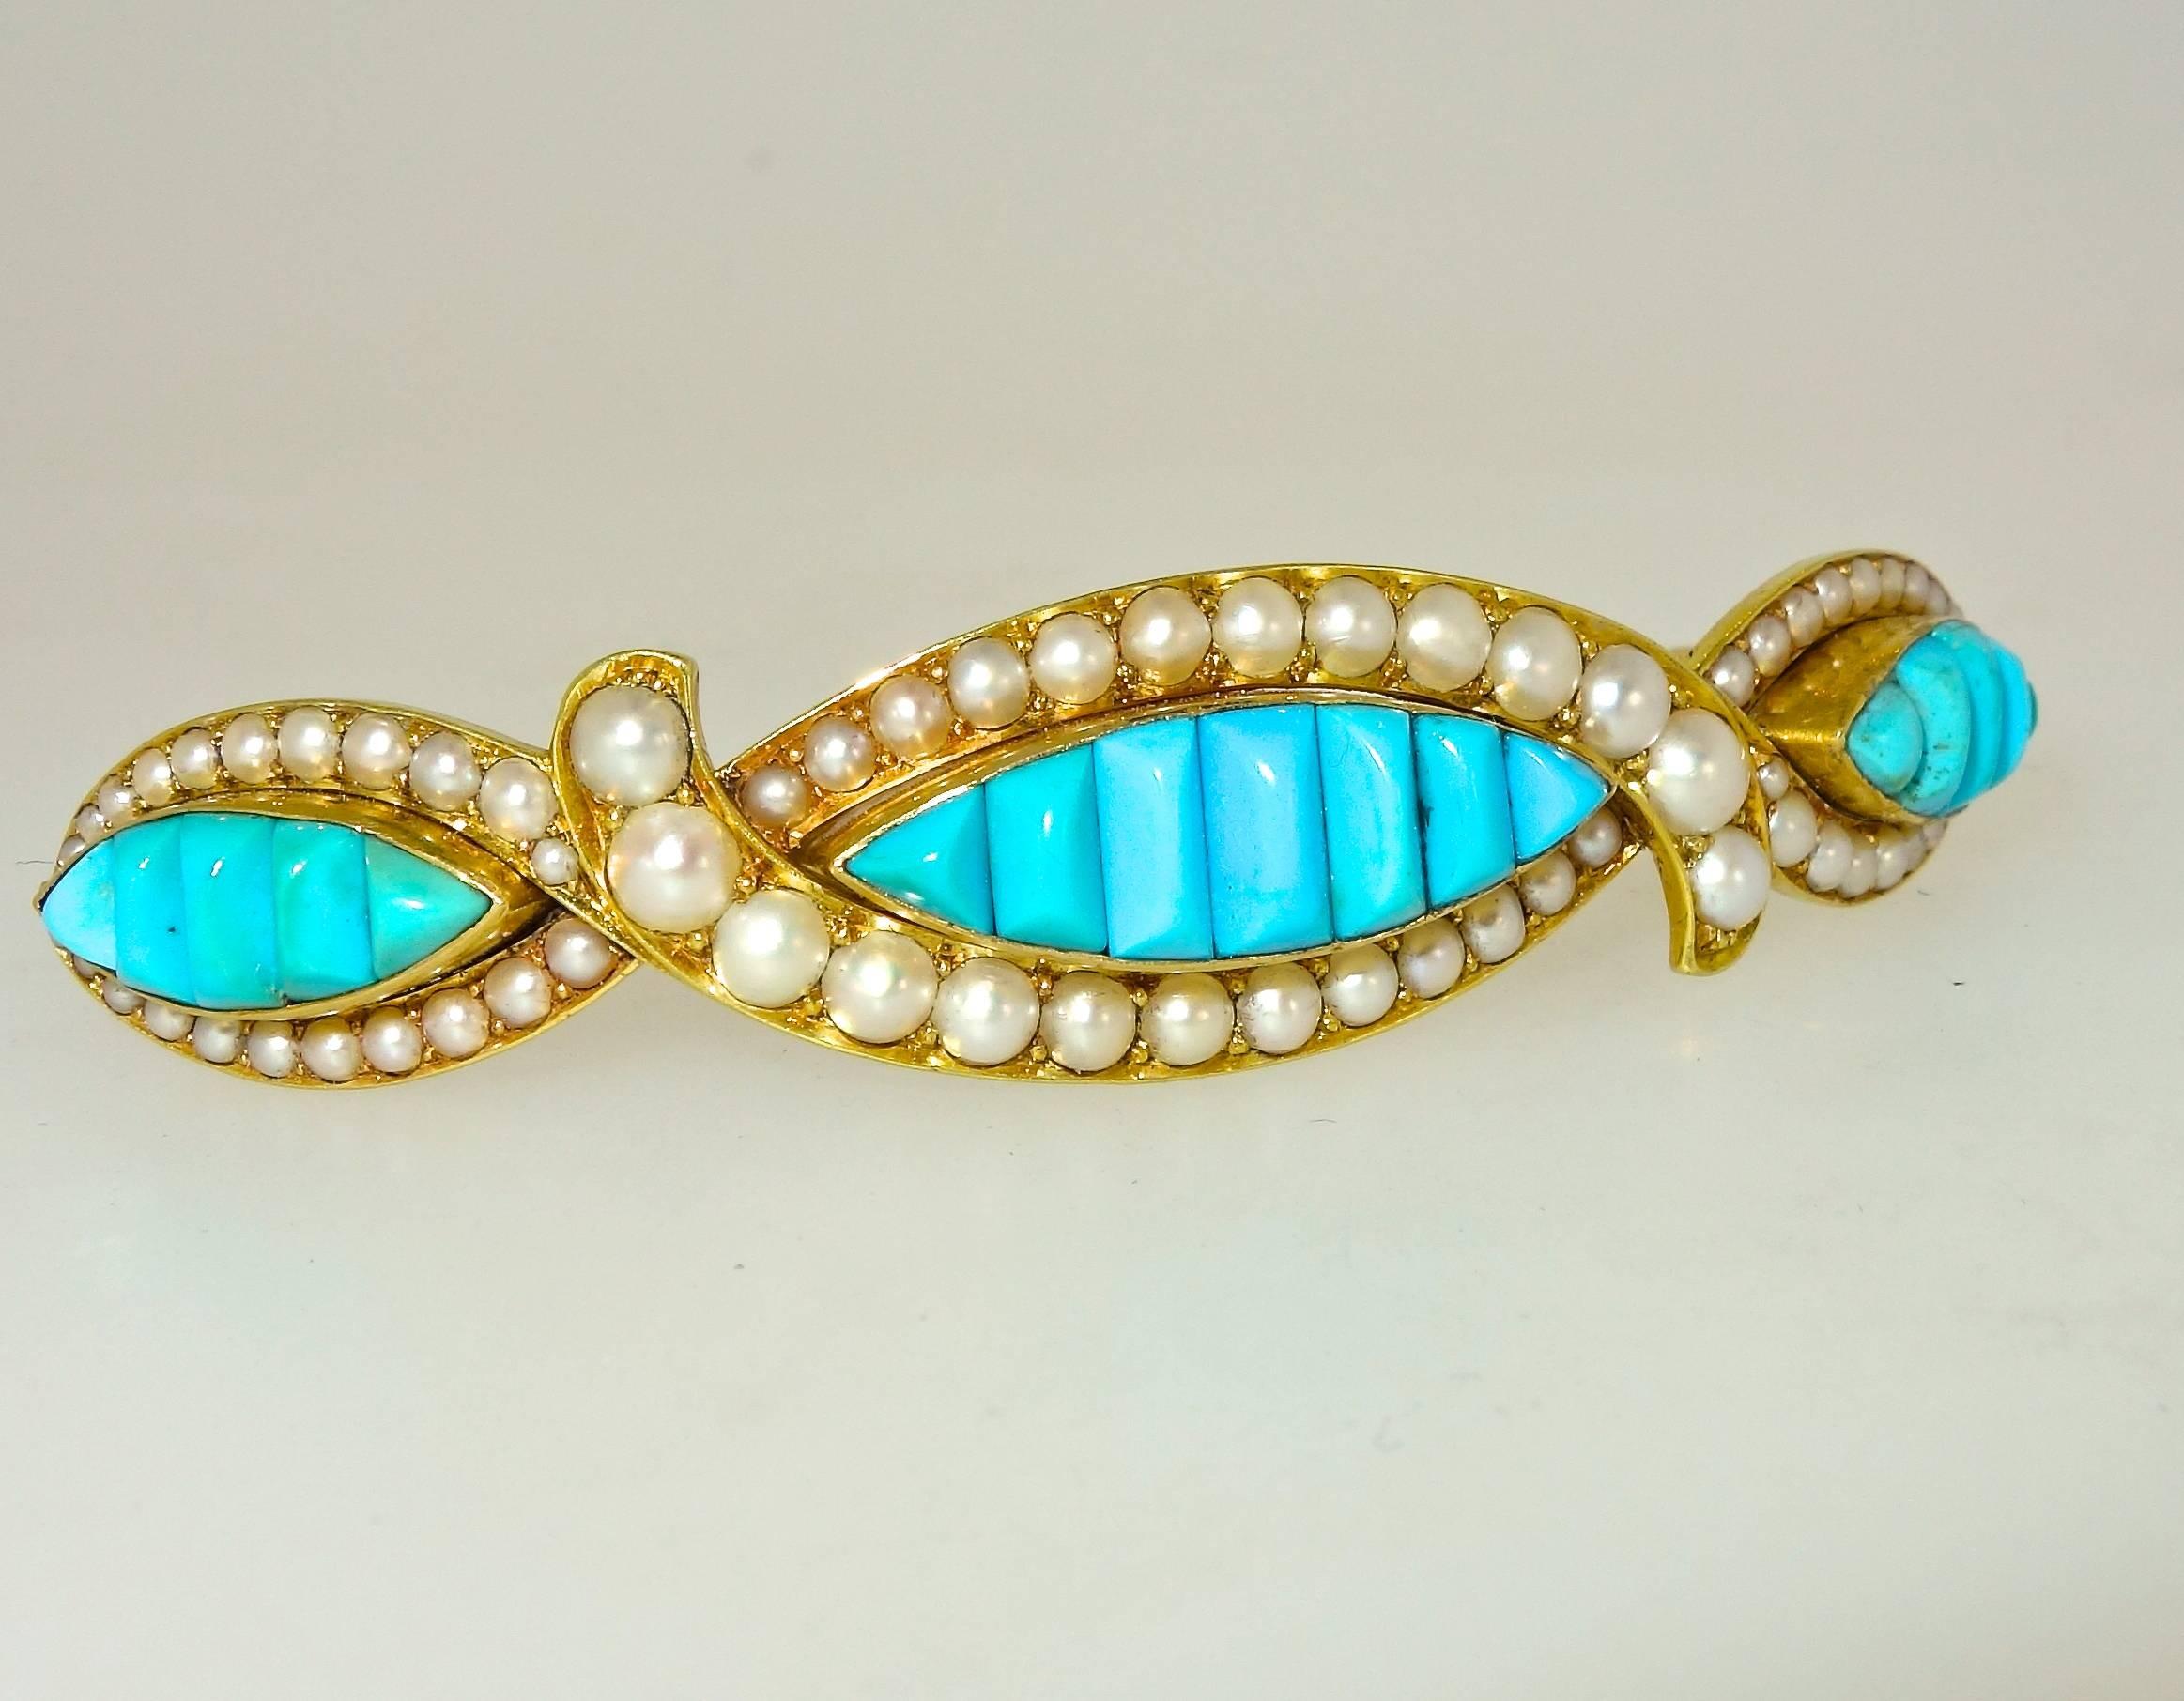 High Victorian Hair Barrette 19th century natural Persian Turquoise and natural pearls in 